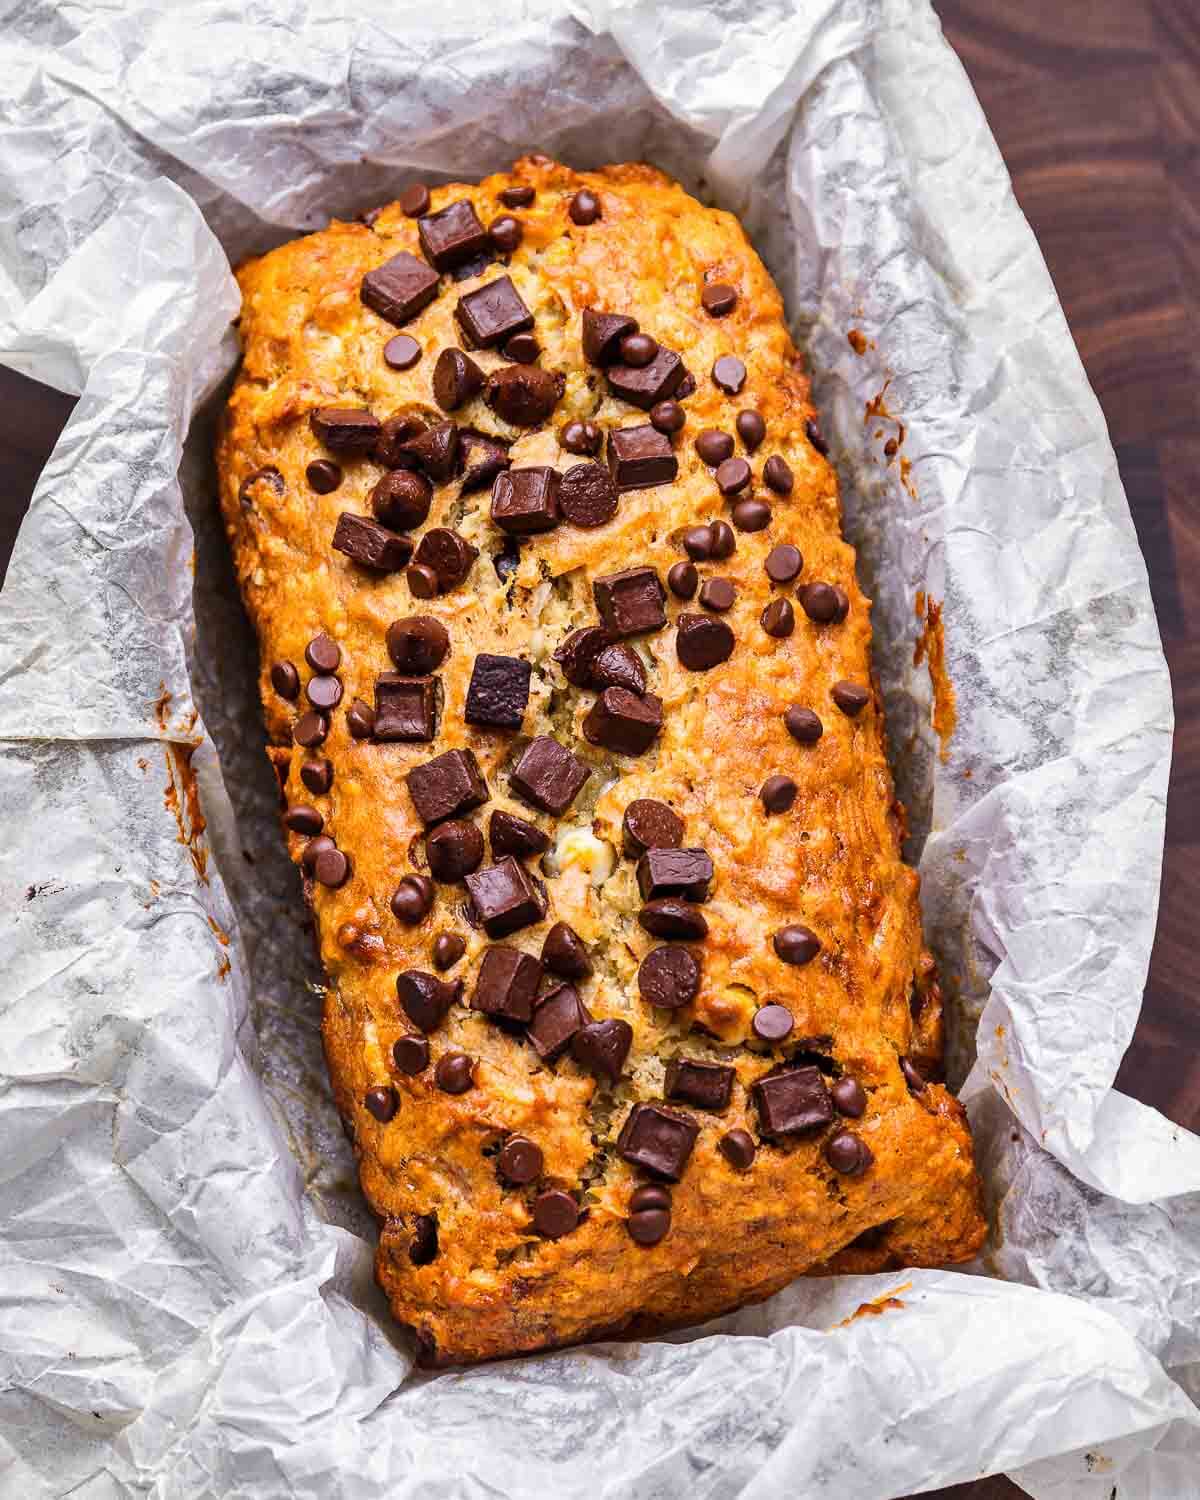 Chocolate chip banana bread wrapped in parchment paper.